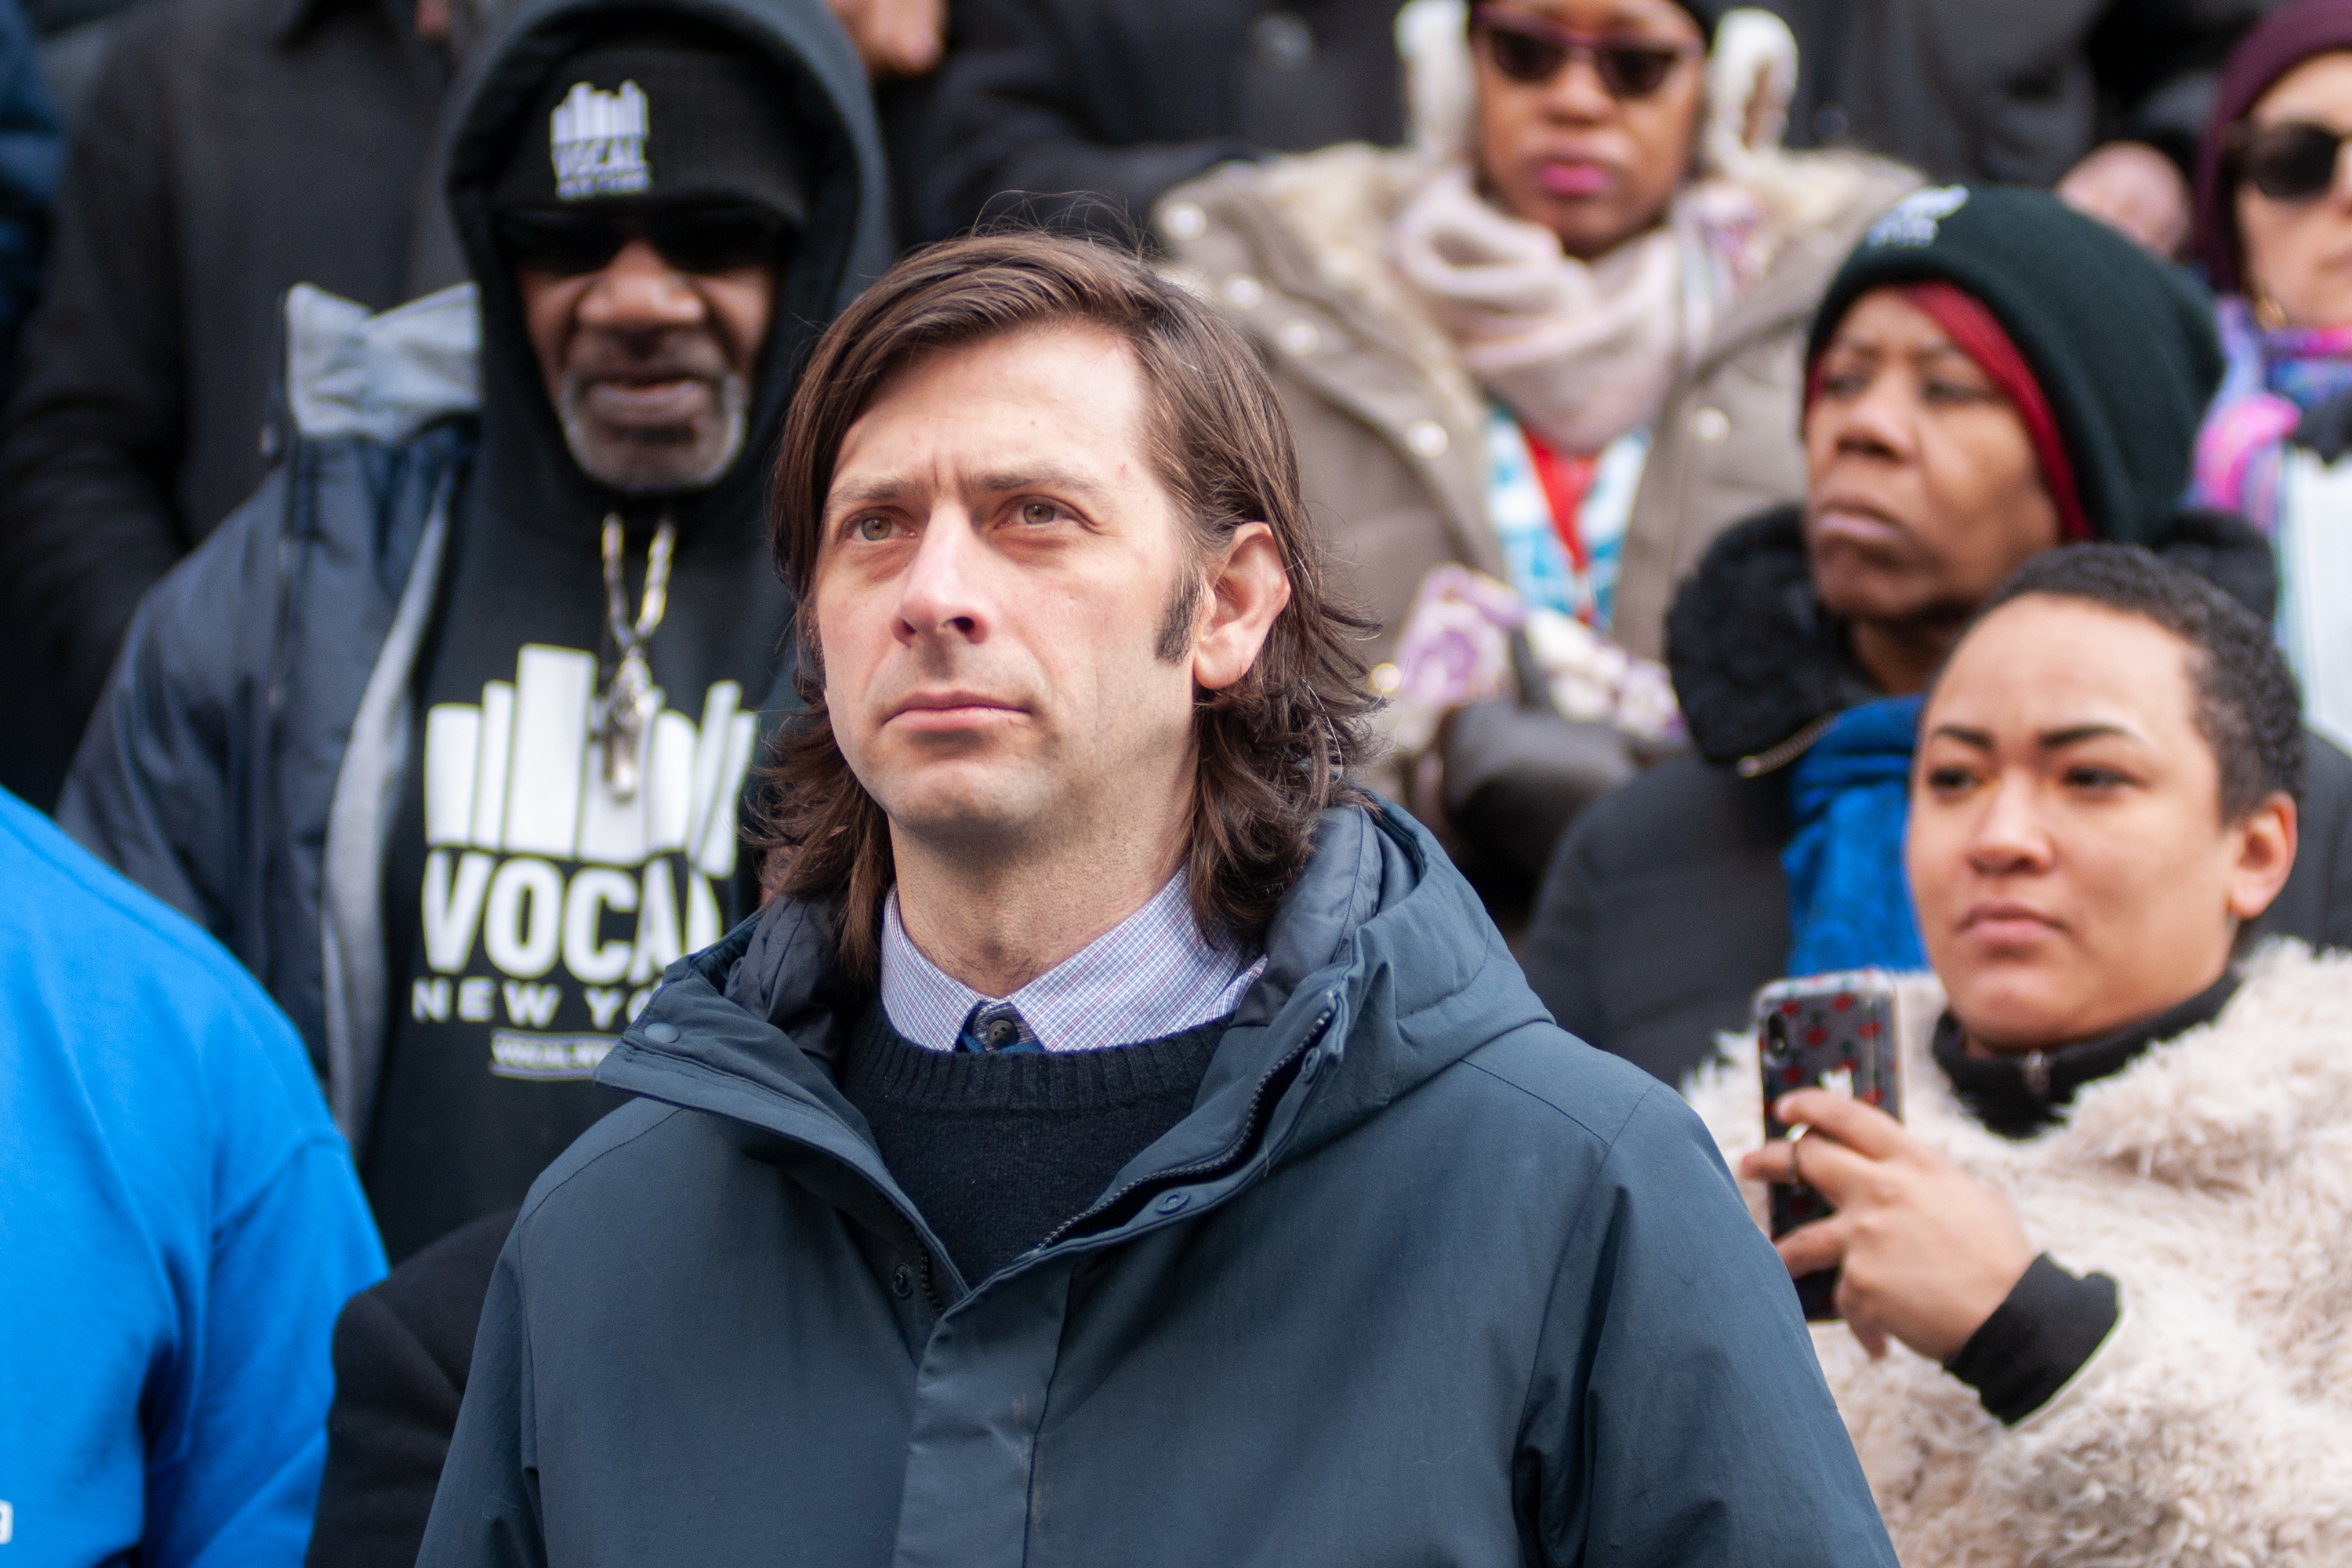 Councilmember Stephen Levin (D-Brooklyn) attends a press conference on the steps of City Hall about combating homelessness, Jan. 30, 2020.